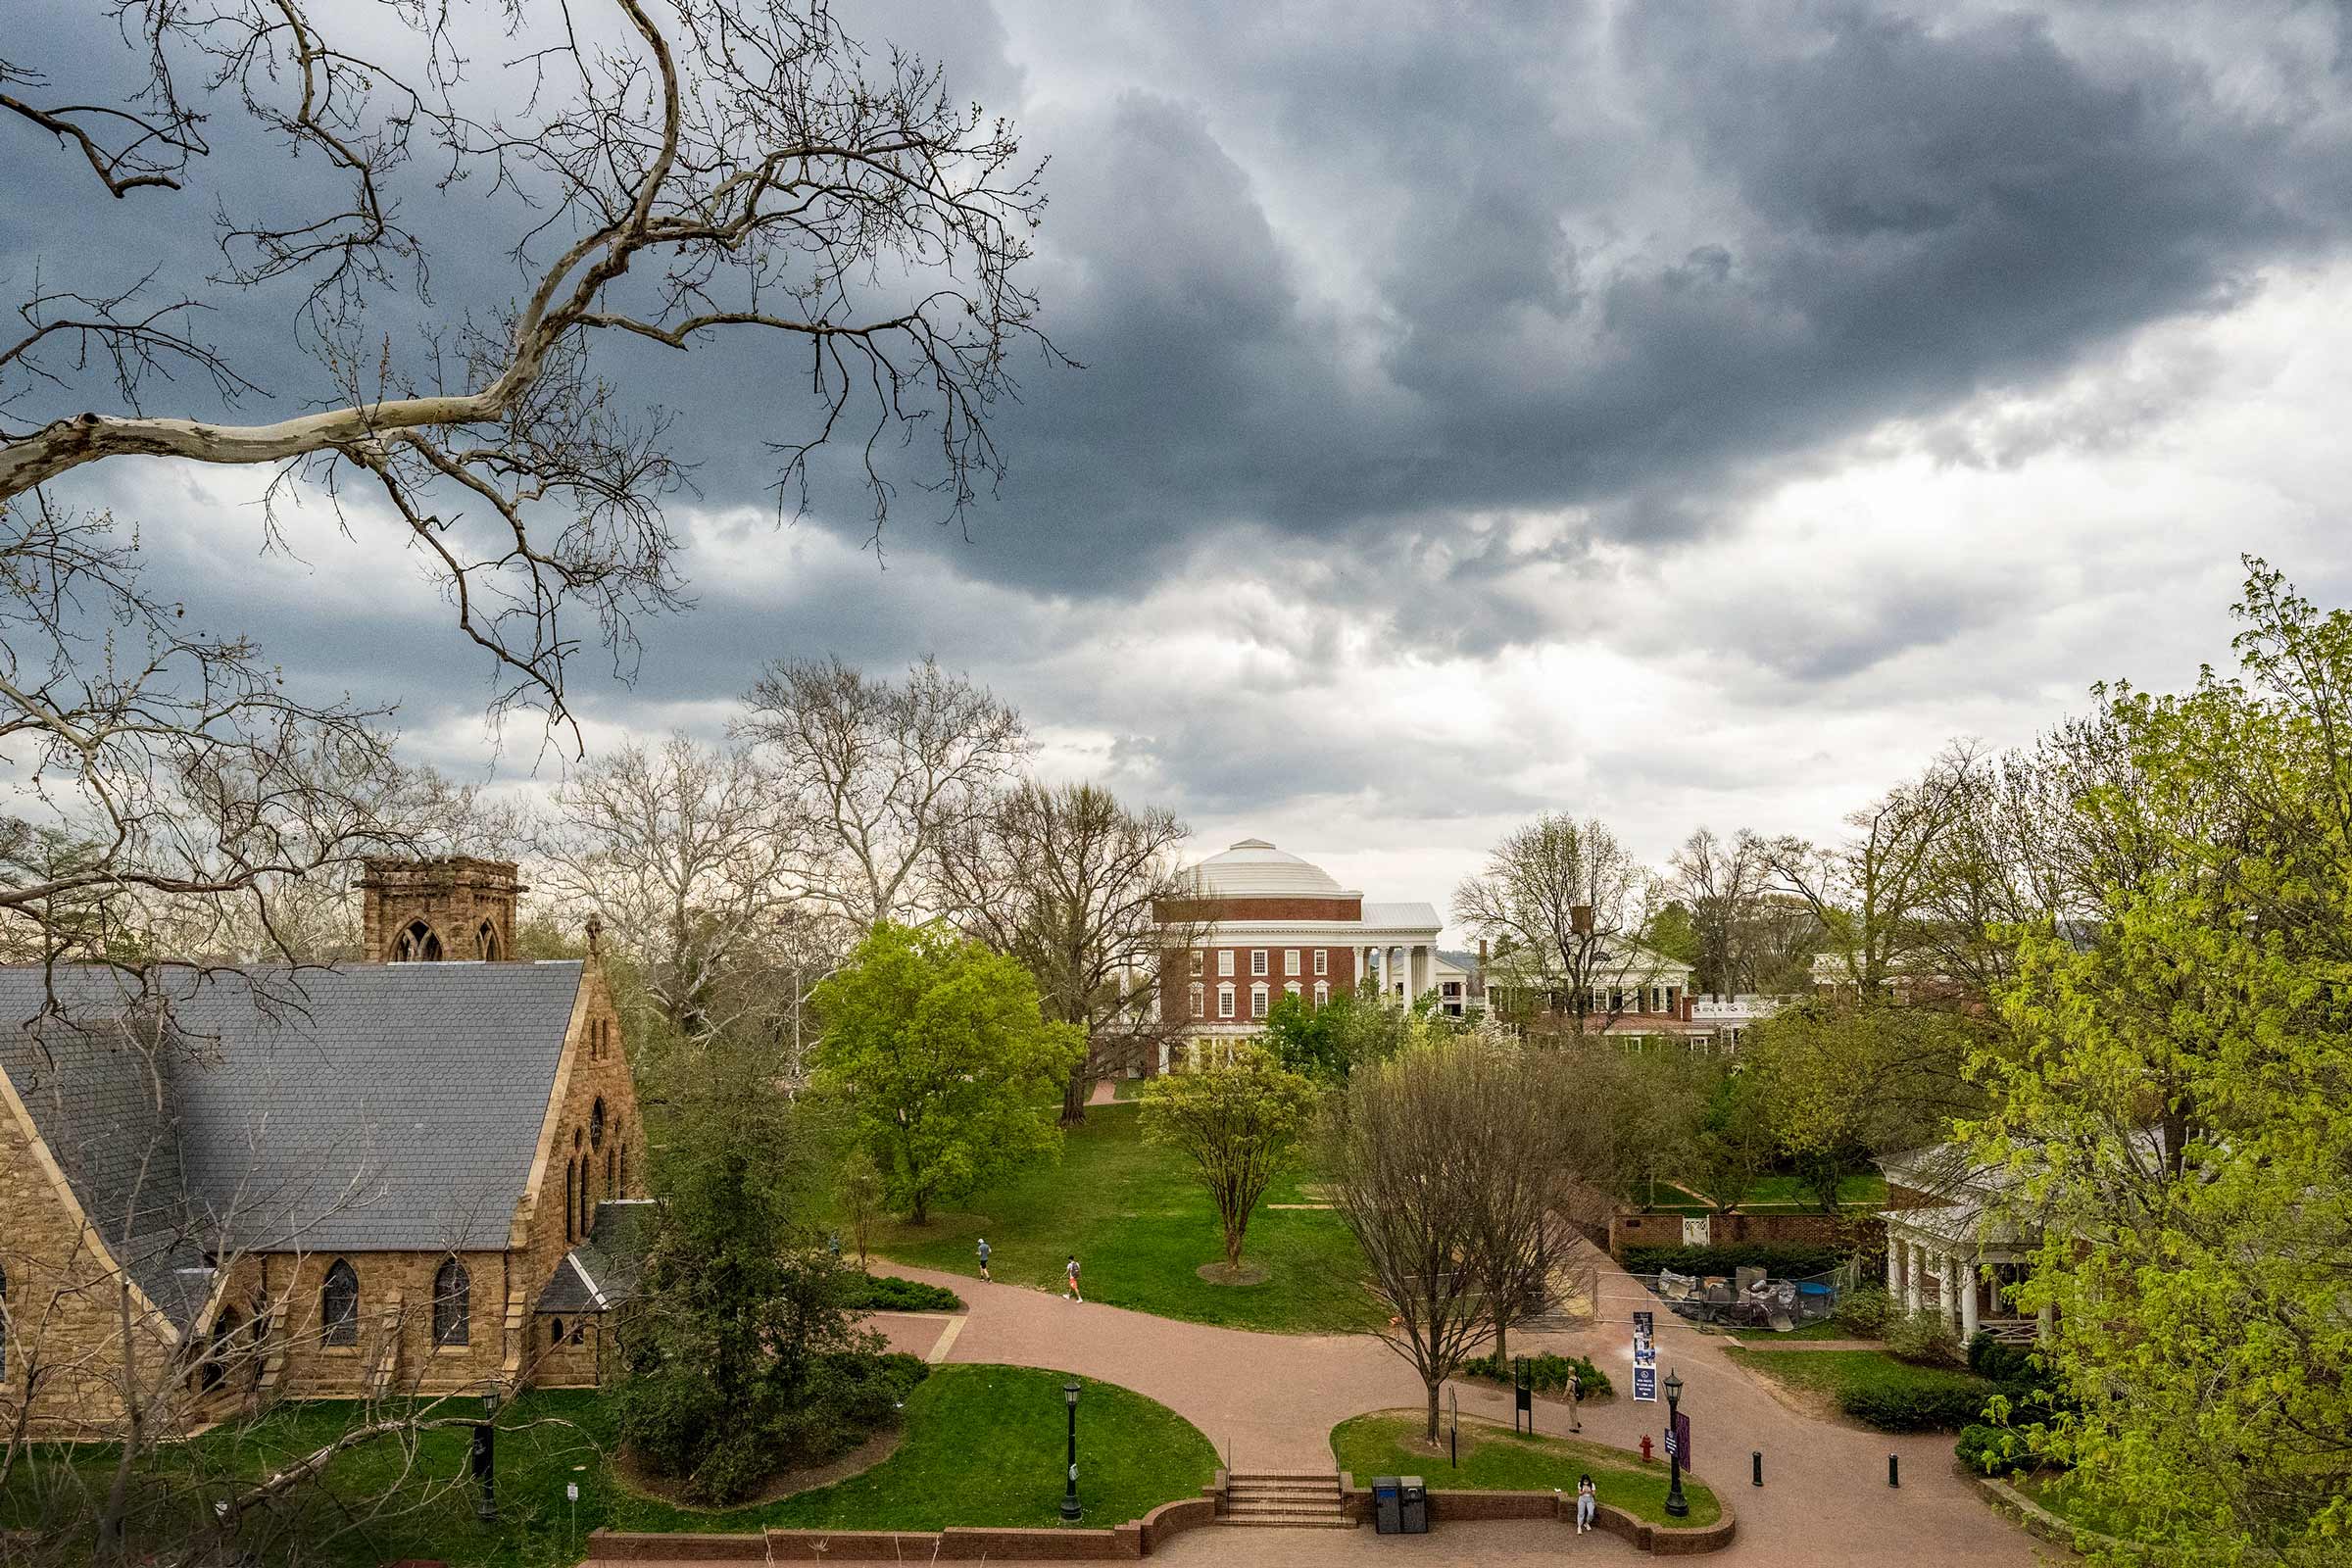 The UVA Rotunda seen from a distance, under a cloudy sky